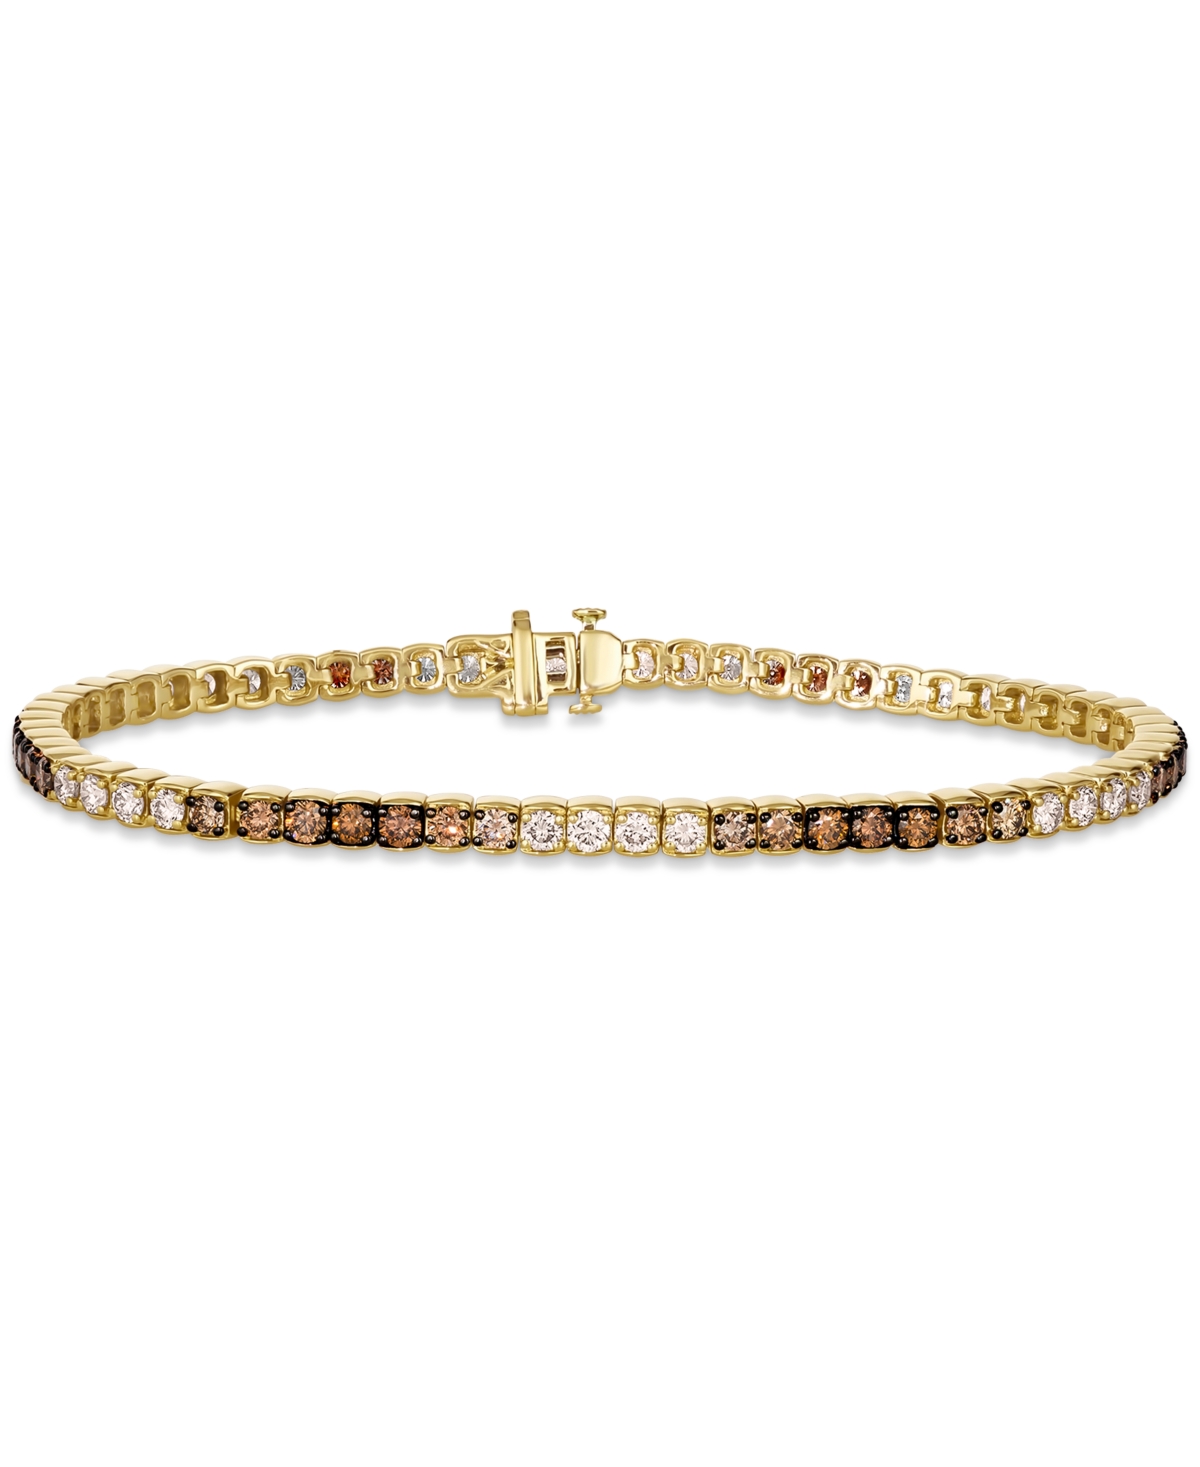 Ombre Chocolate Ombre Diamond Tennis Bracelet (3-1/2 ct. t.w.) in 14k Rose Gold (Also Available in White Gold or Yellow Gold) - Yellow Gold